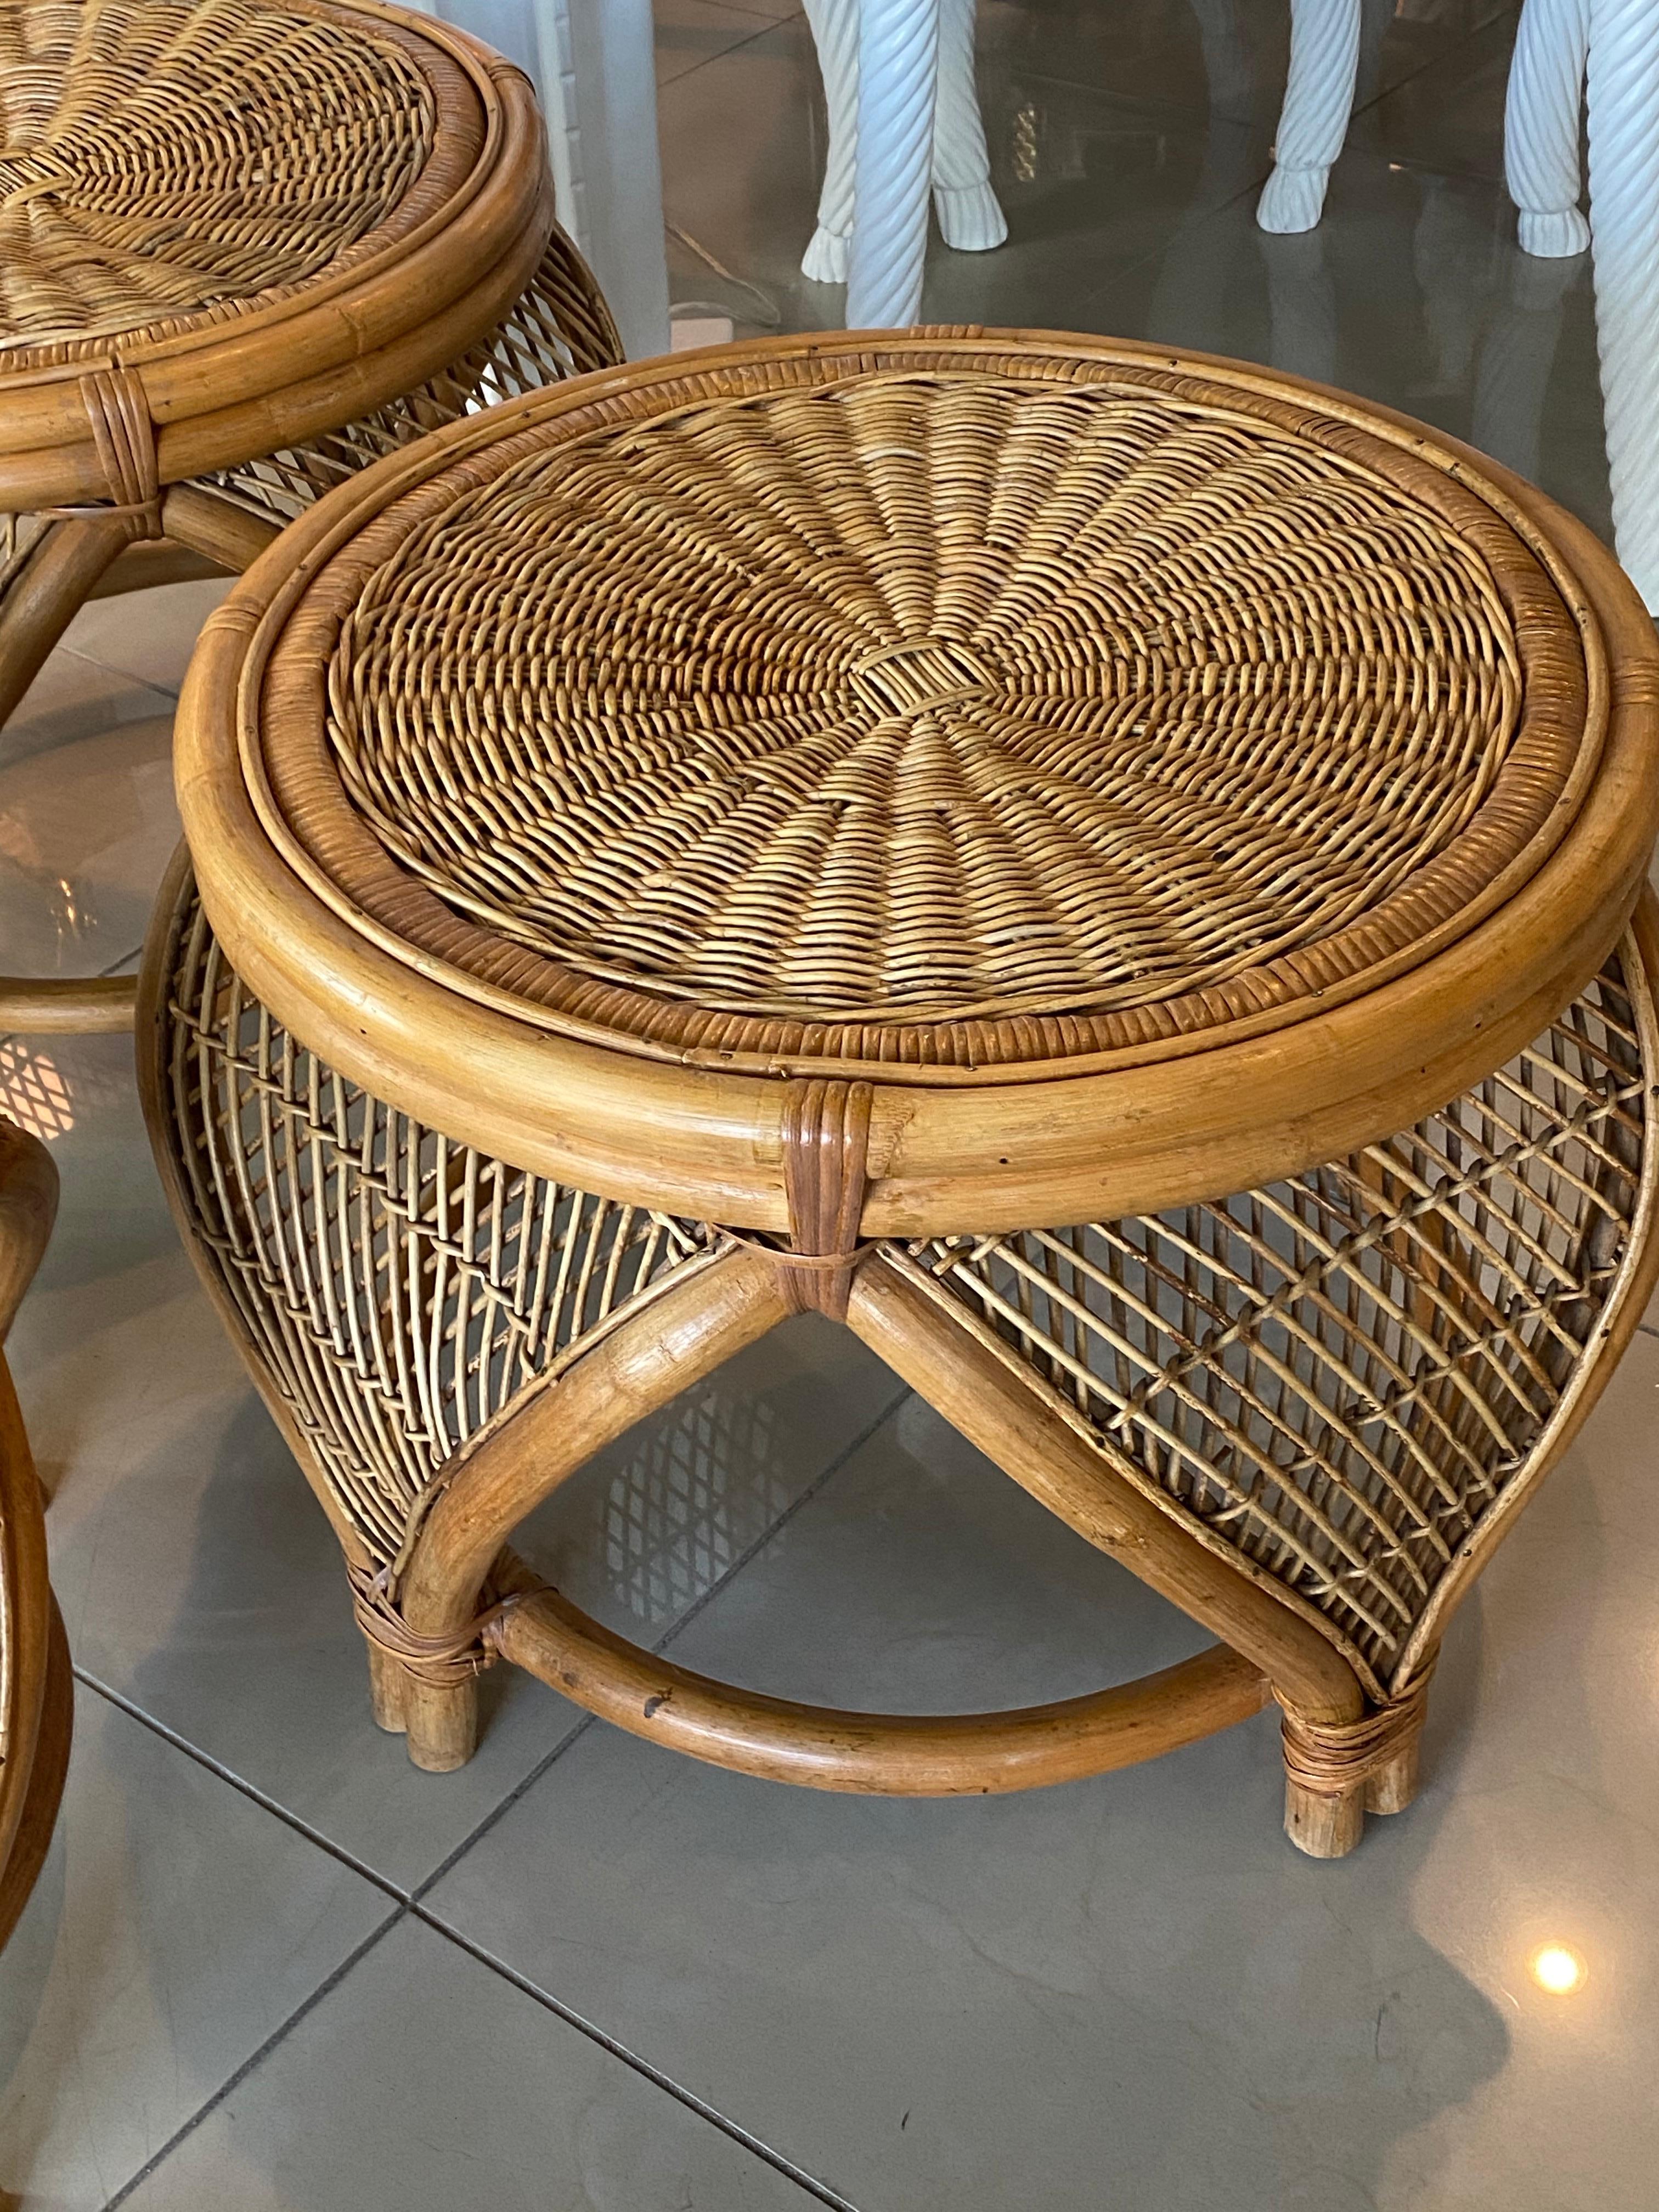 Vintage Set of 3 Rattan & Wicker Moroccan Stools Benches Ottomans Footstools 3